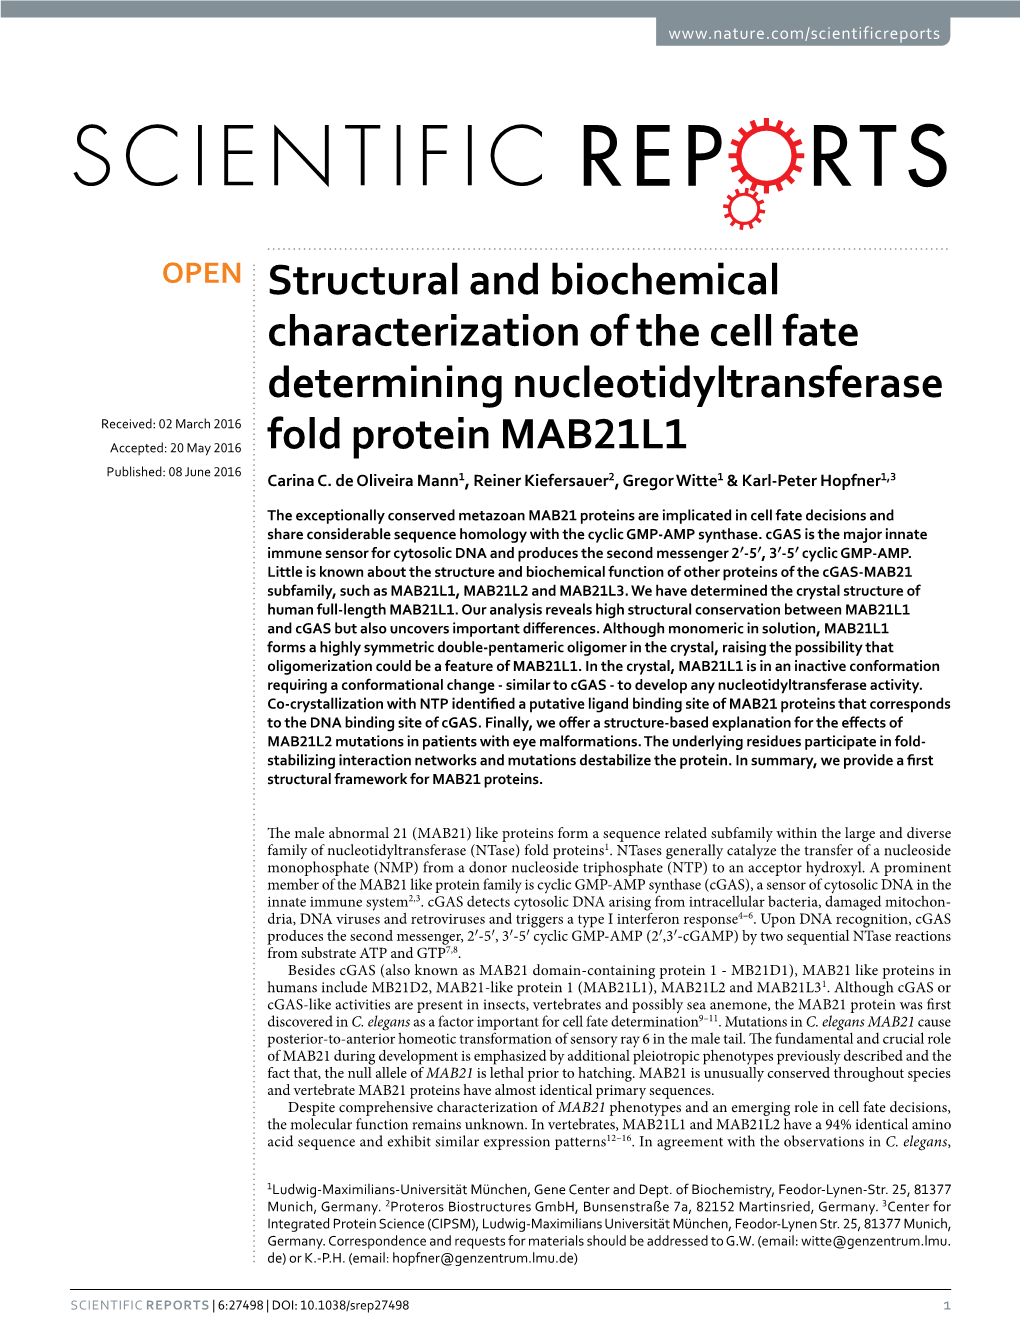 Structural and Biochemical Characterization of the Cell Fate